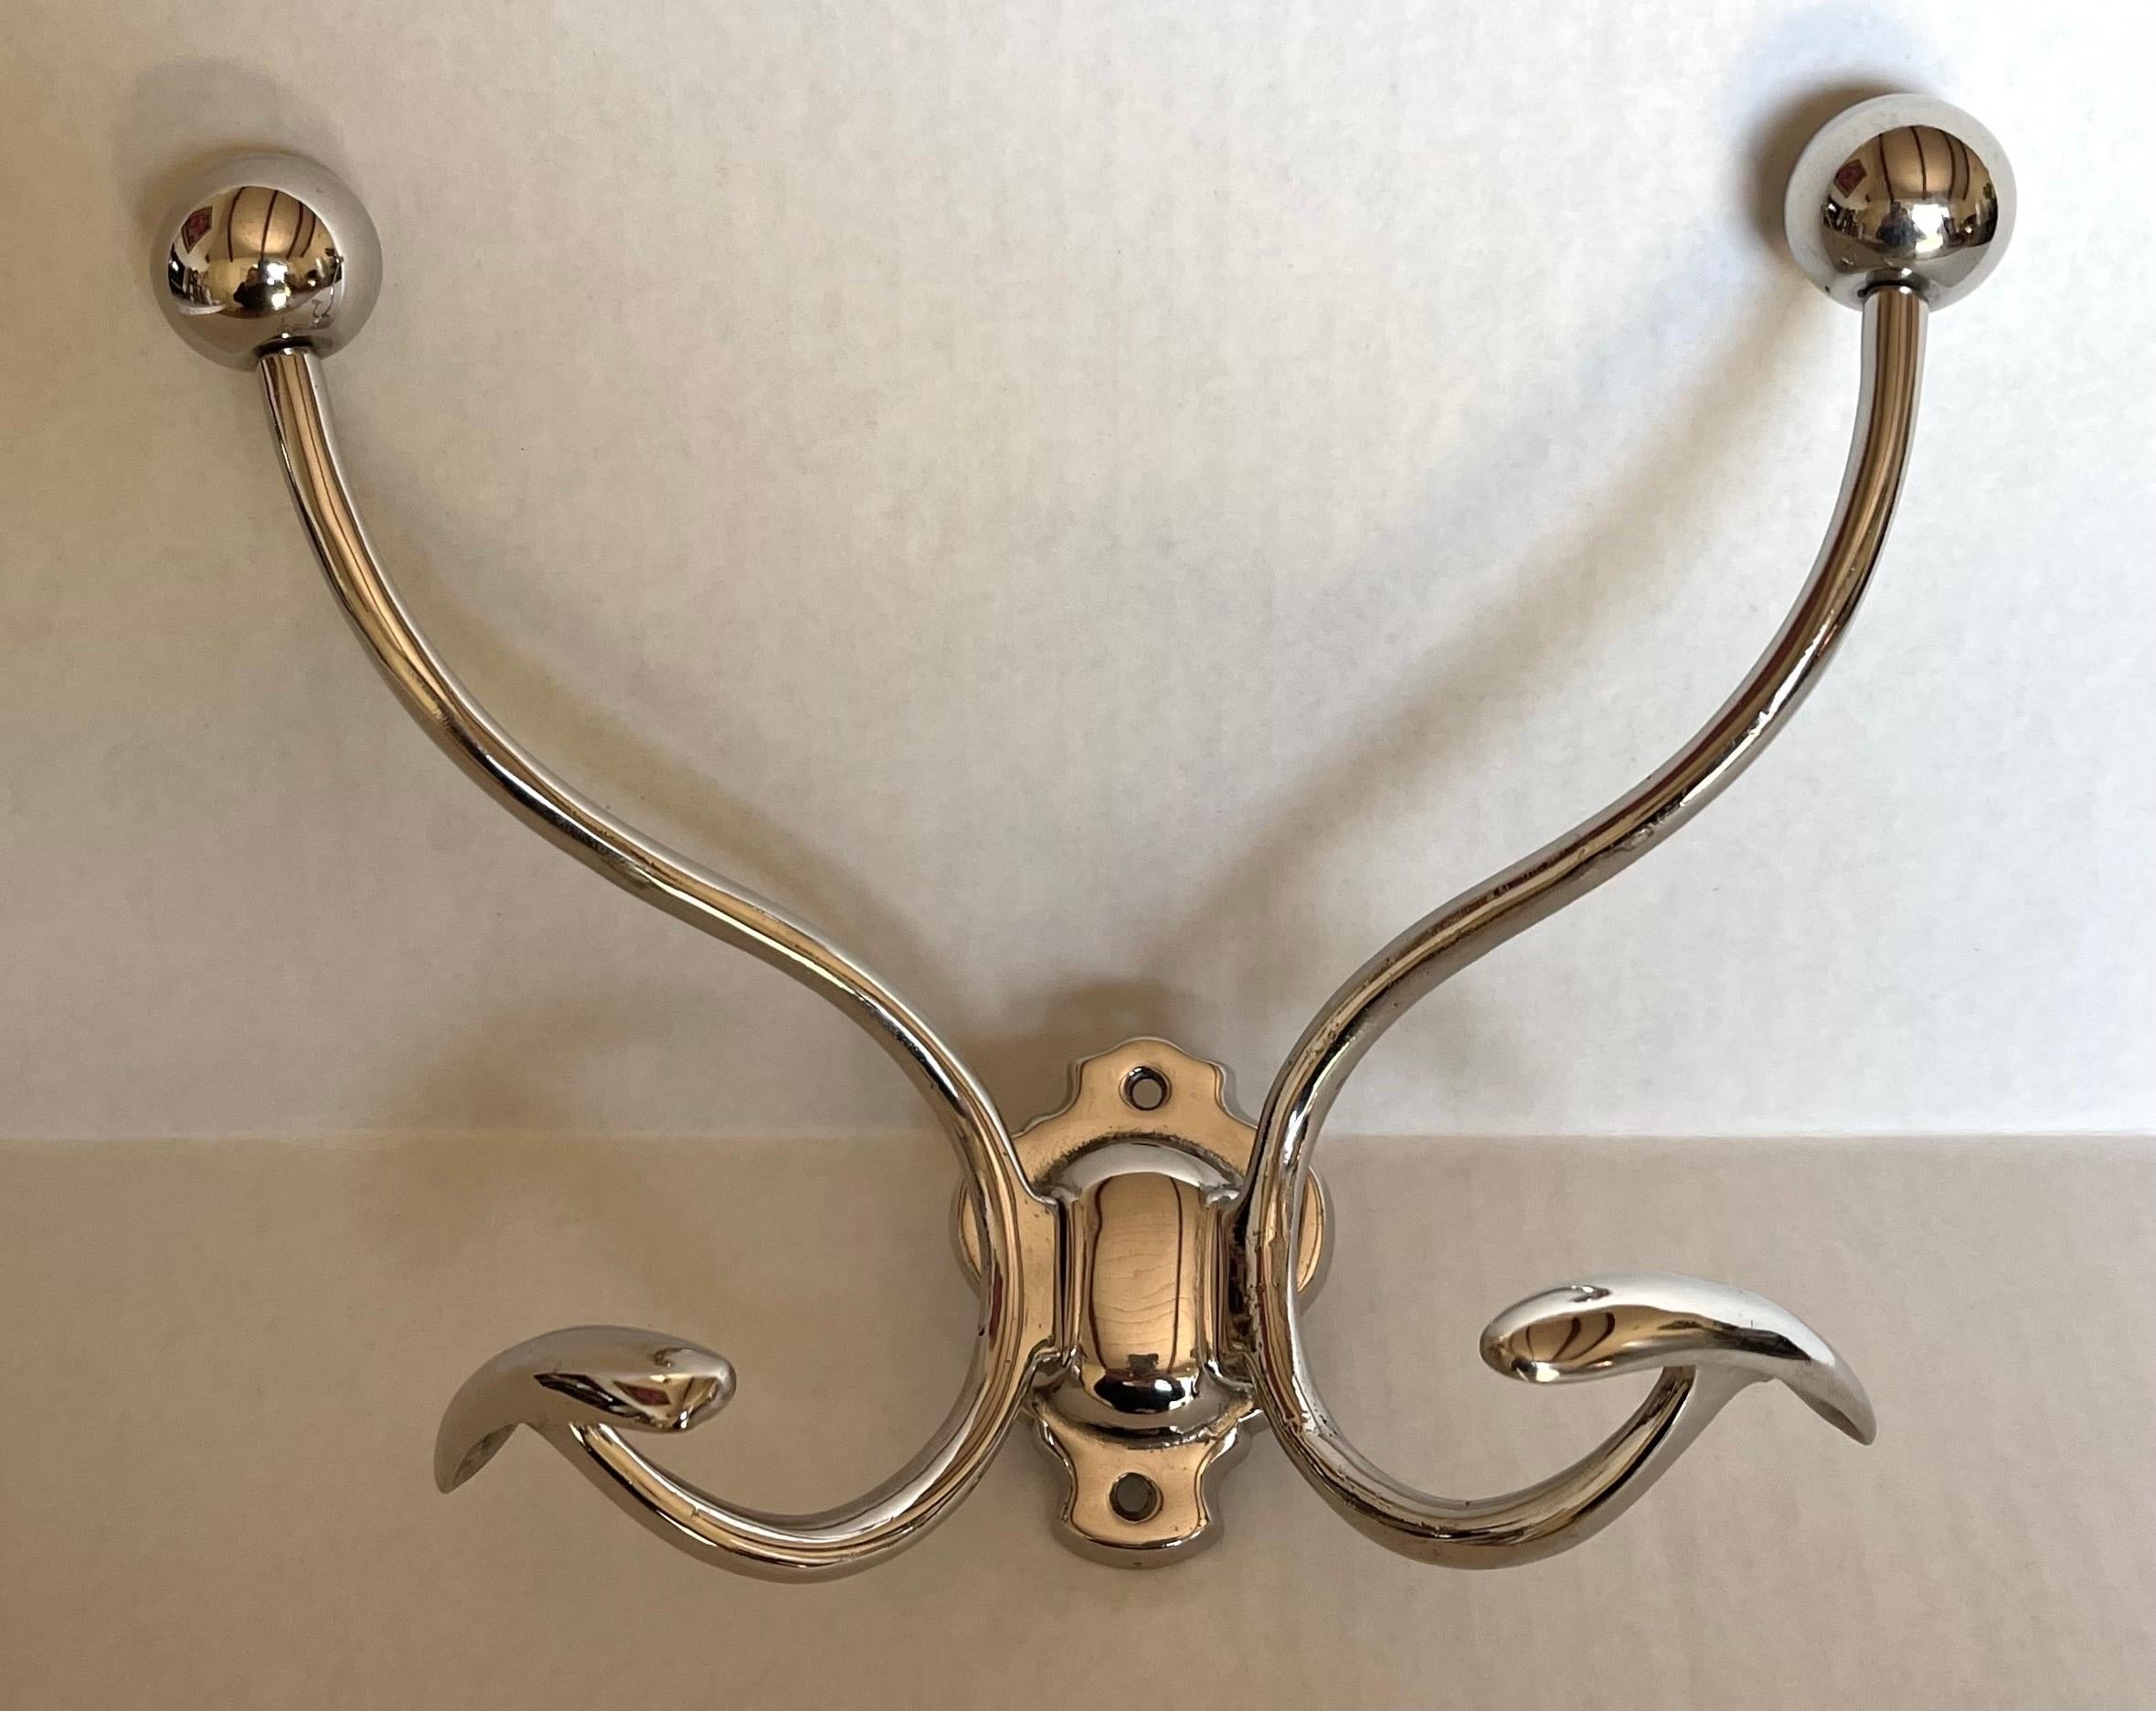 1930s nickel two-arm coat or towel hook. Newly professionally polished to a high shine. 
Mounting hardware is not included.